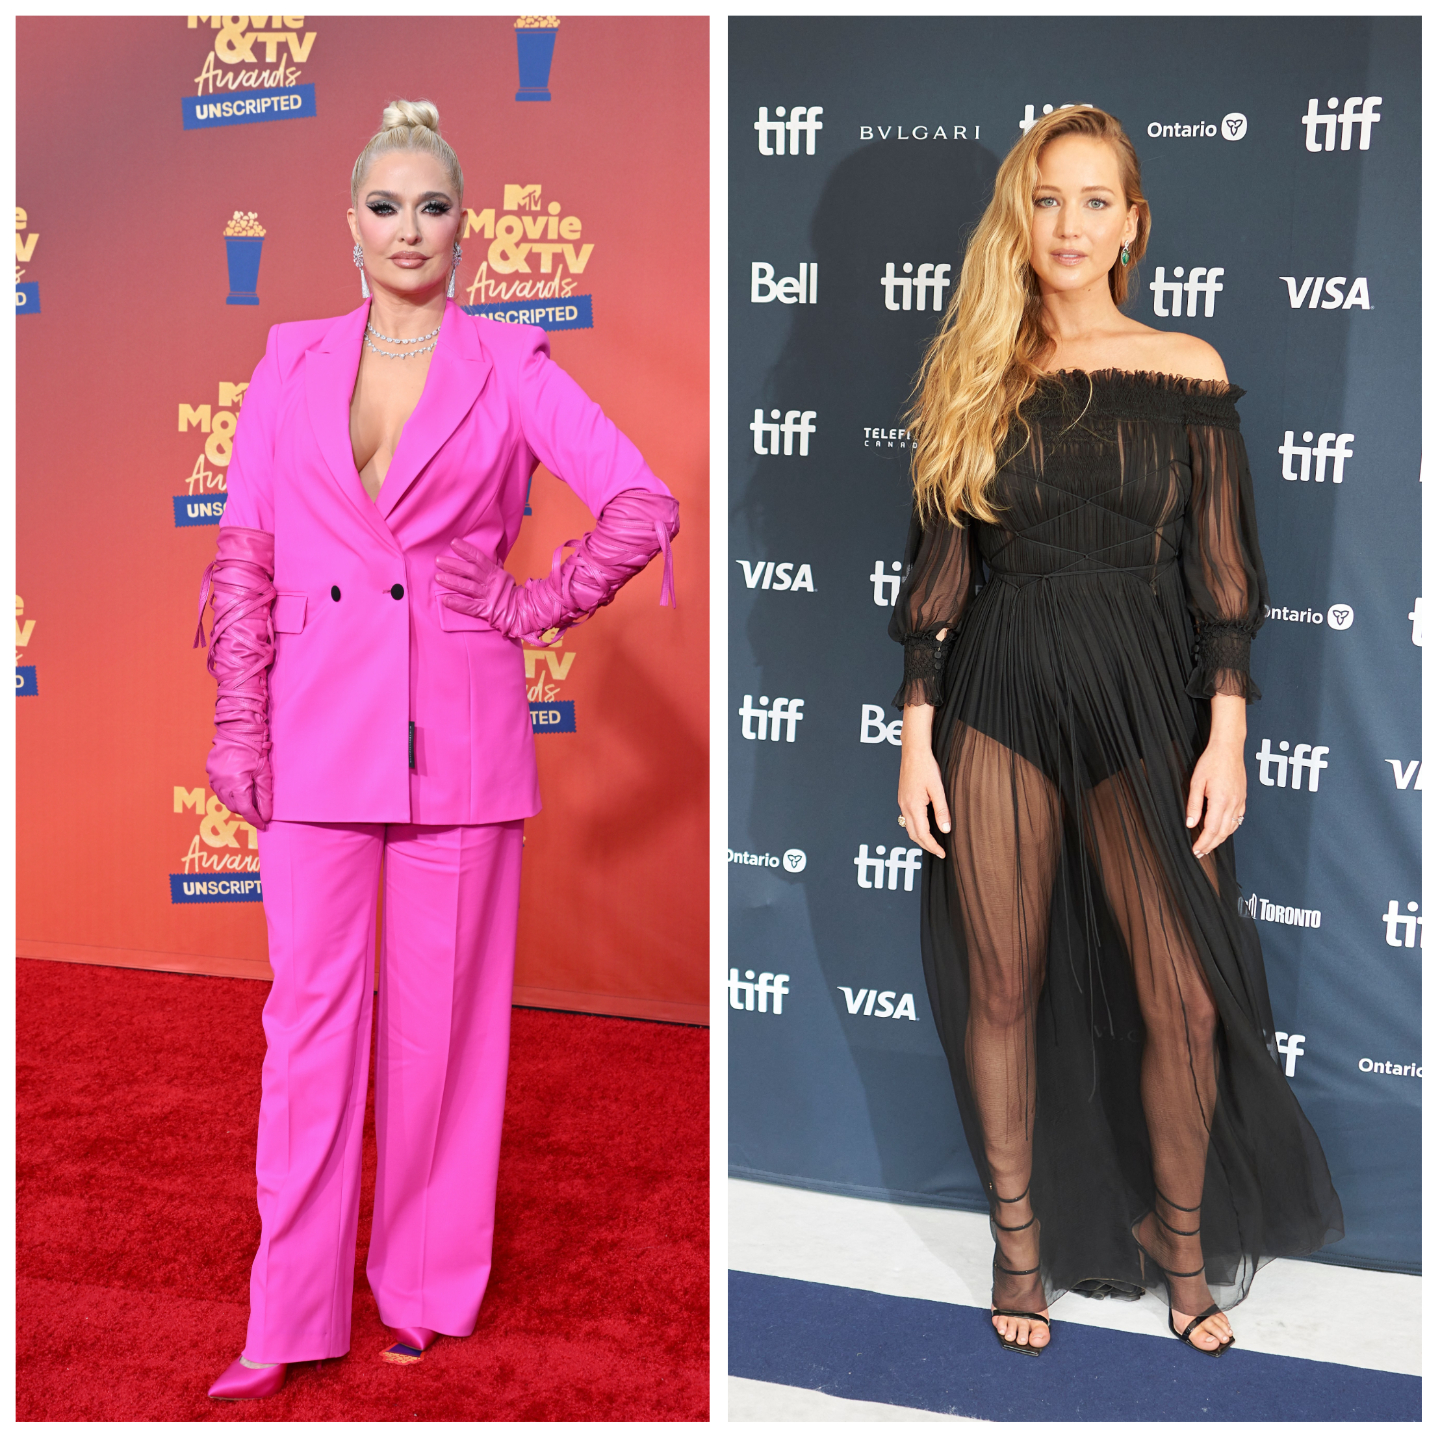 Erika Jayne wears all pink on the red carpet. Jennifer Lawrence is in all black at anther red carpet event. 